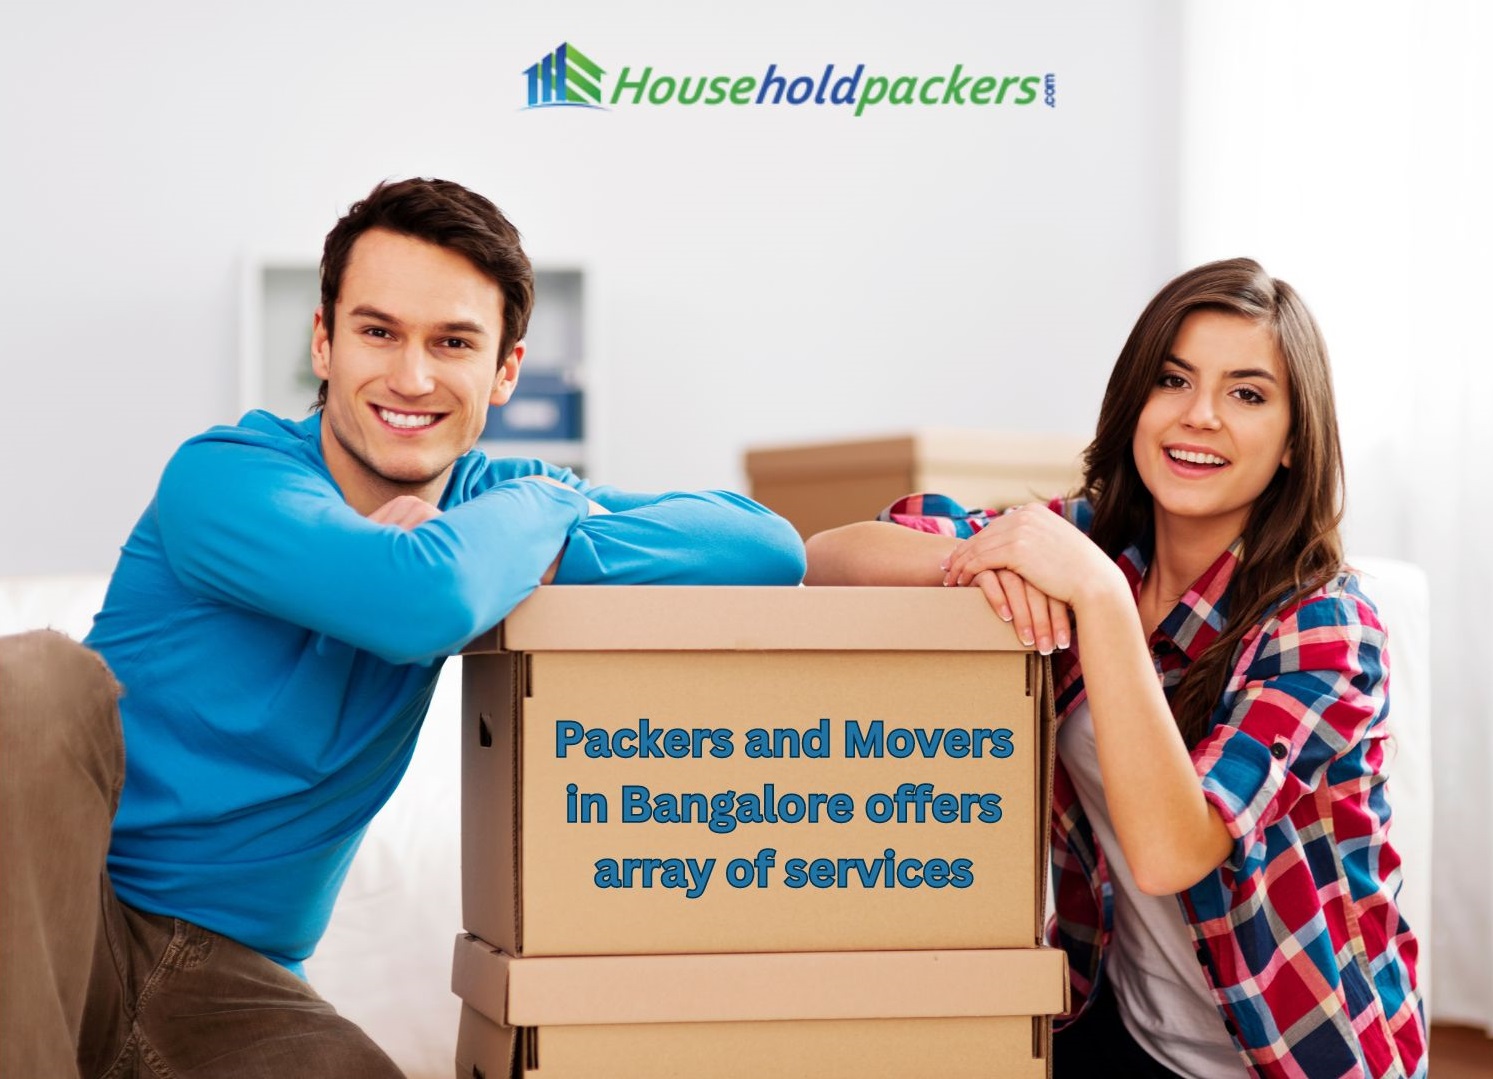 Packers and Movers in Bangalore Offers Array of Services